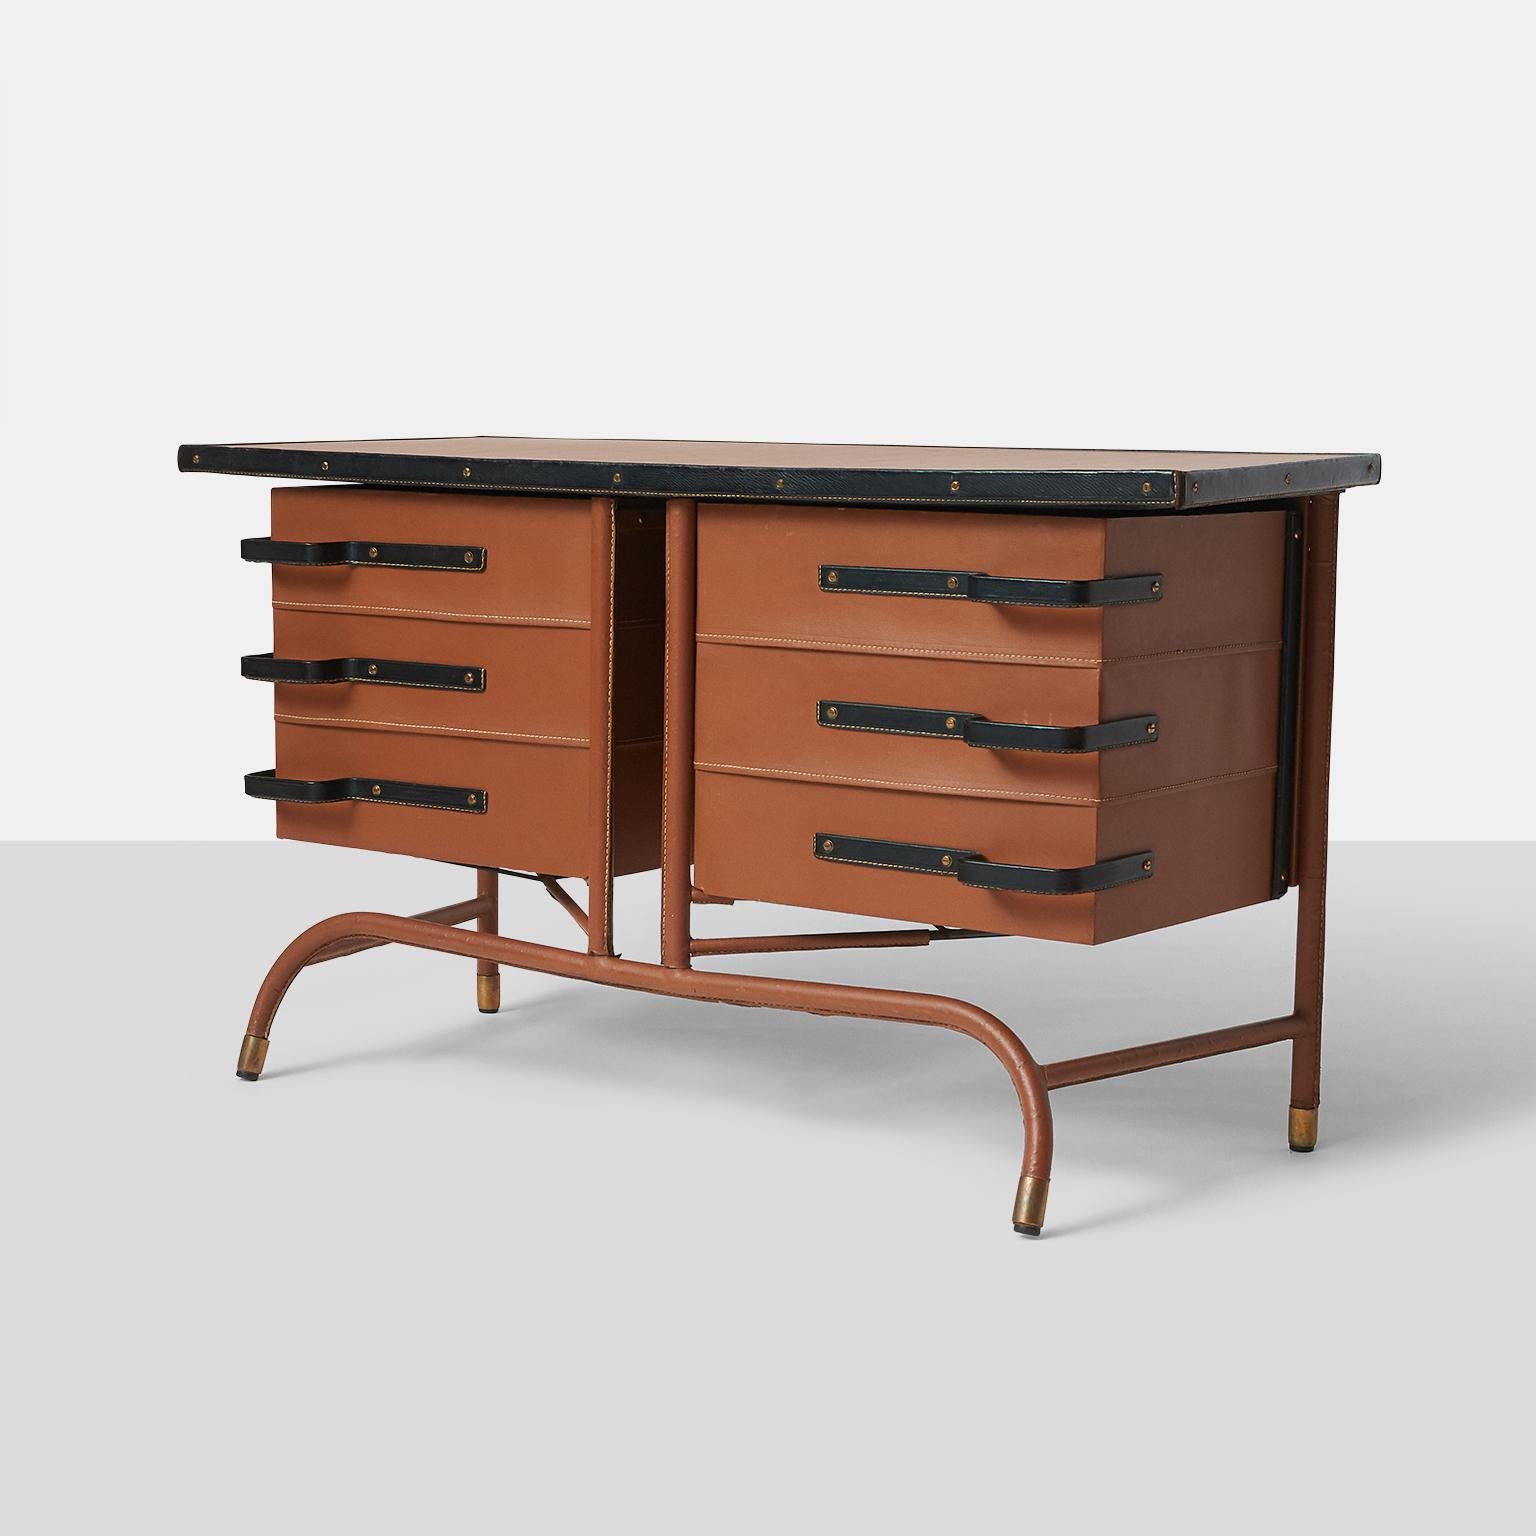 Jacques Quinet Commode
A unique cabinet or credenza with two doors that swing open from the center. Each door contains horizontal storage shelves, and the entire cabinet is wrapped in tan saddle stitched leather with black leather handles. 
This